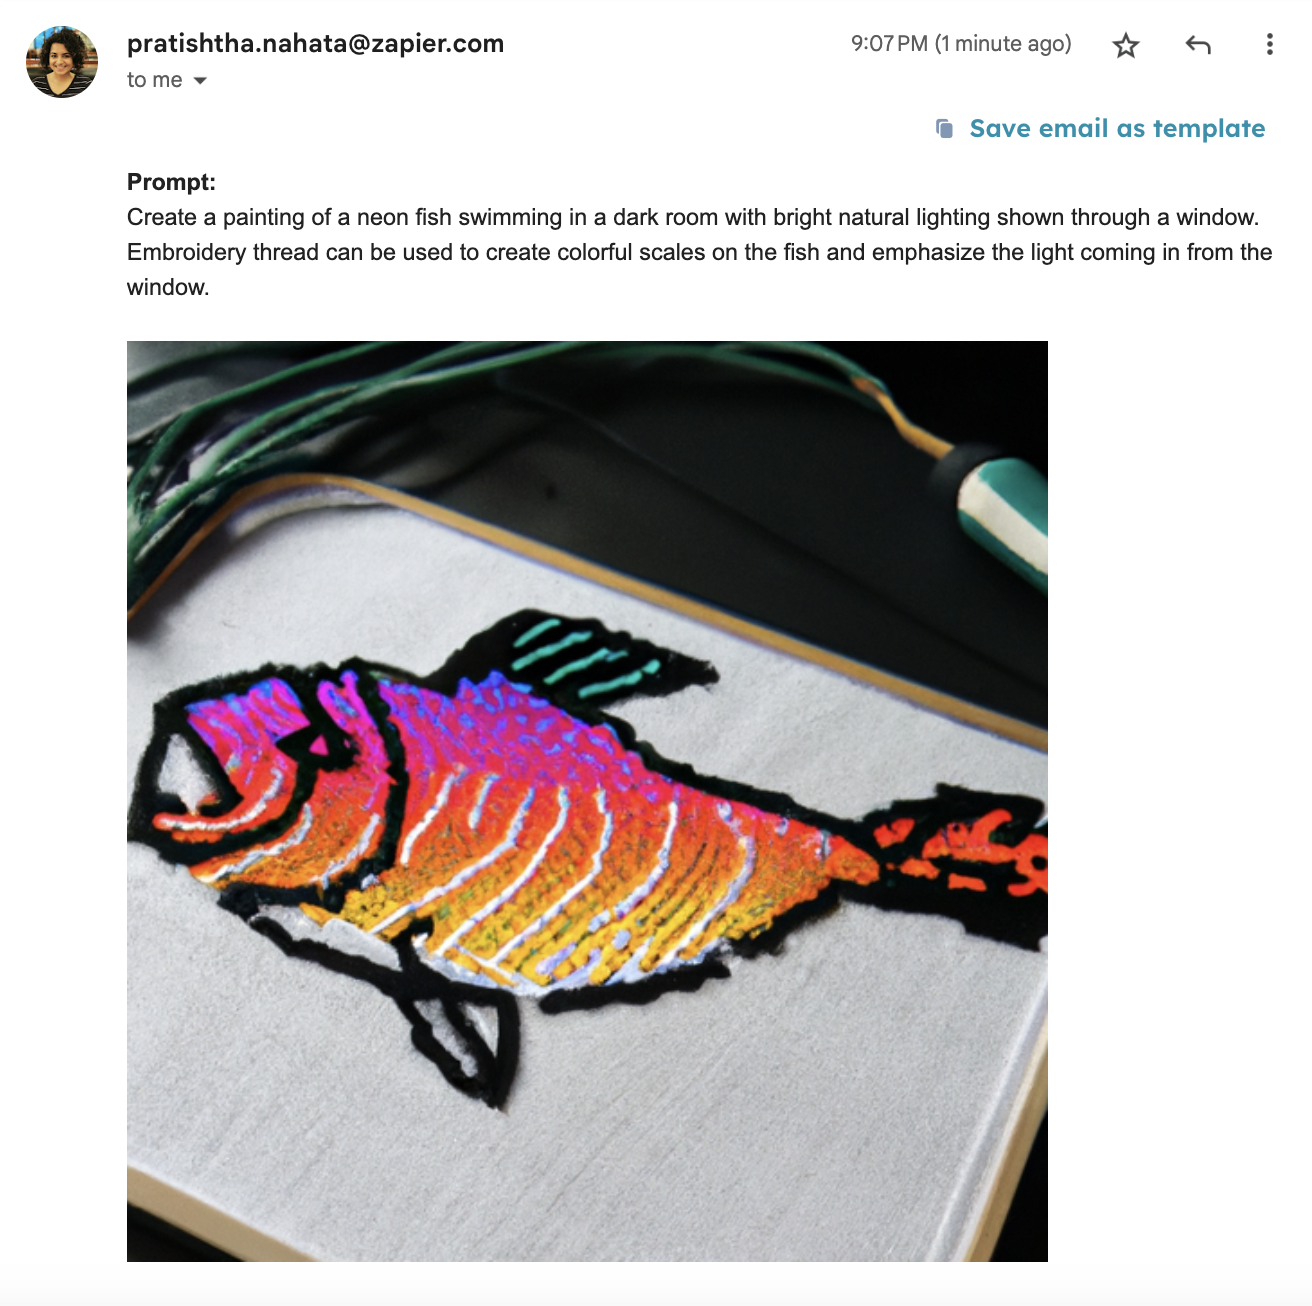 An email with an art inspiration prompt and an image generated by DALL-E of a fish created with embroidery thread.